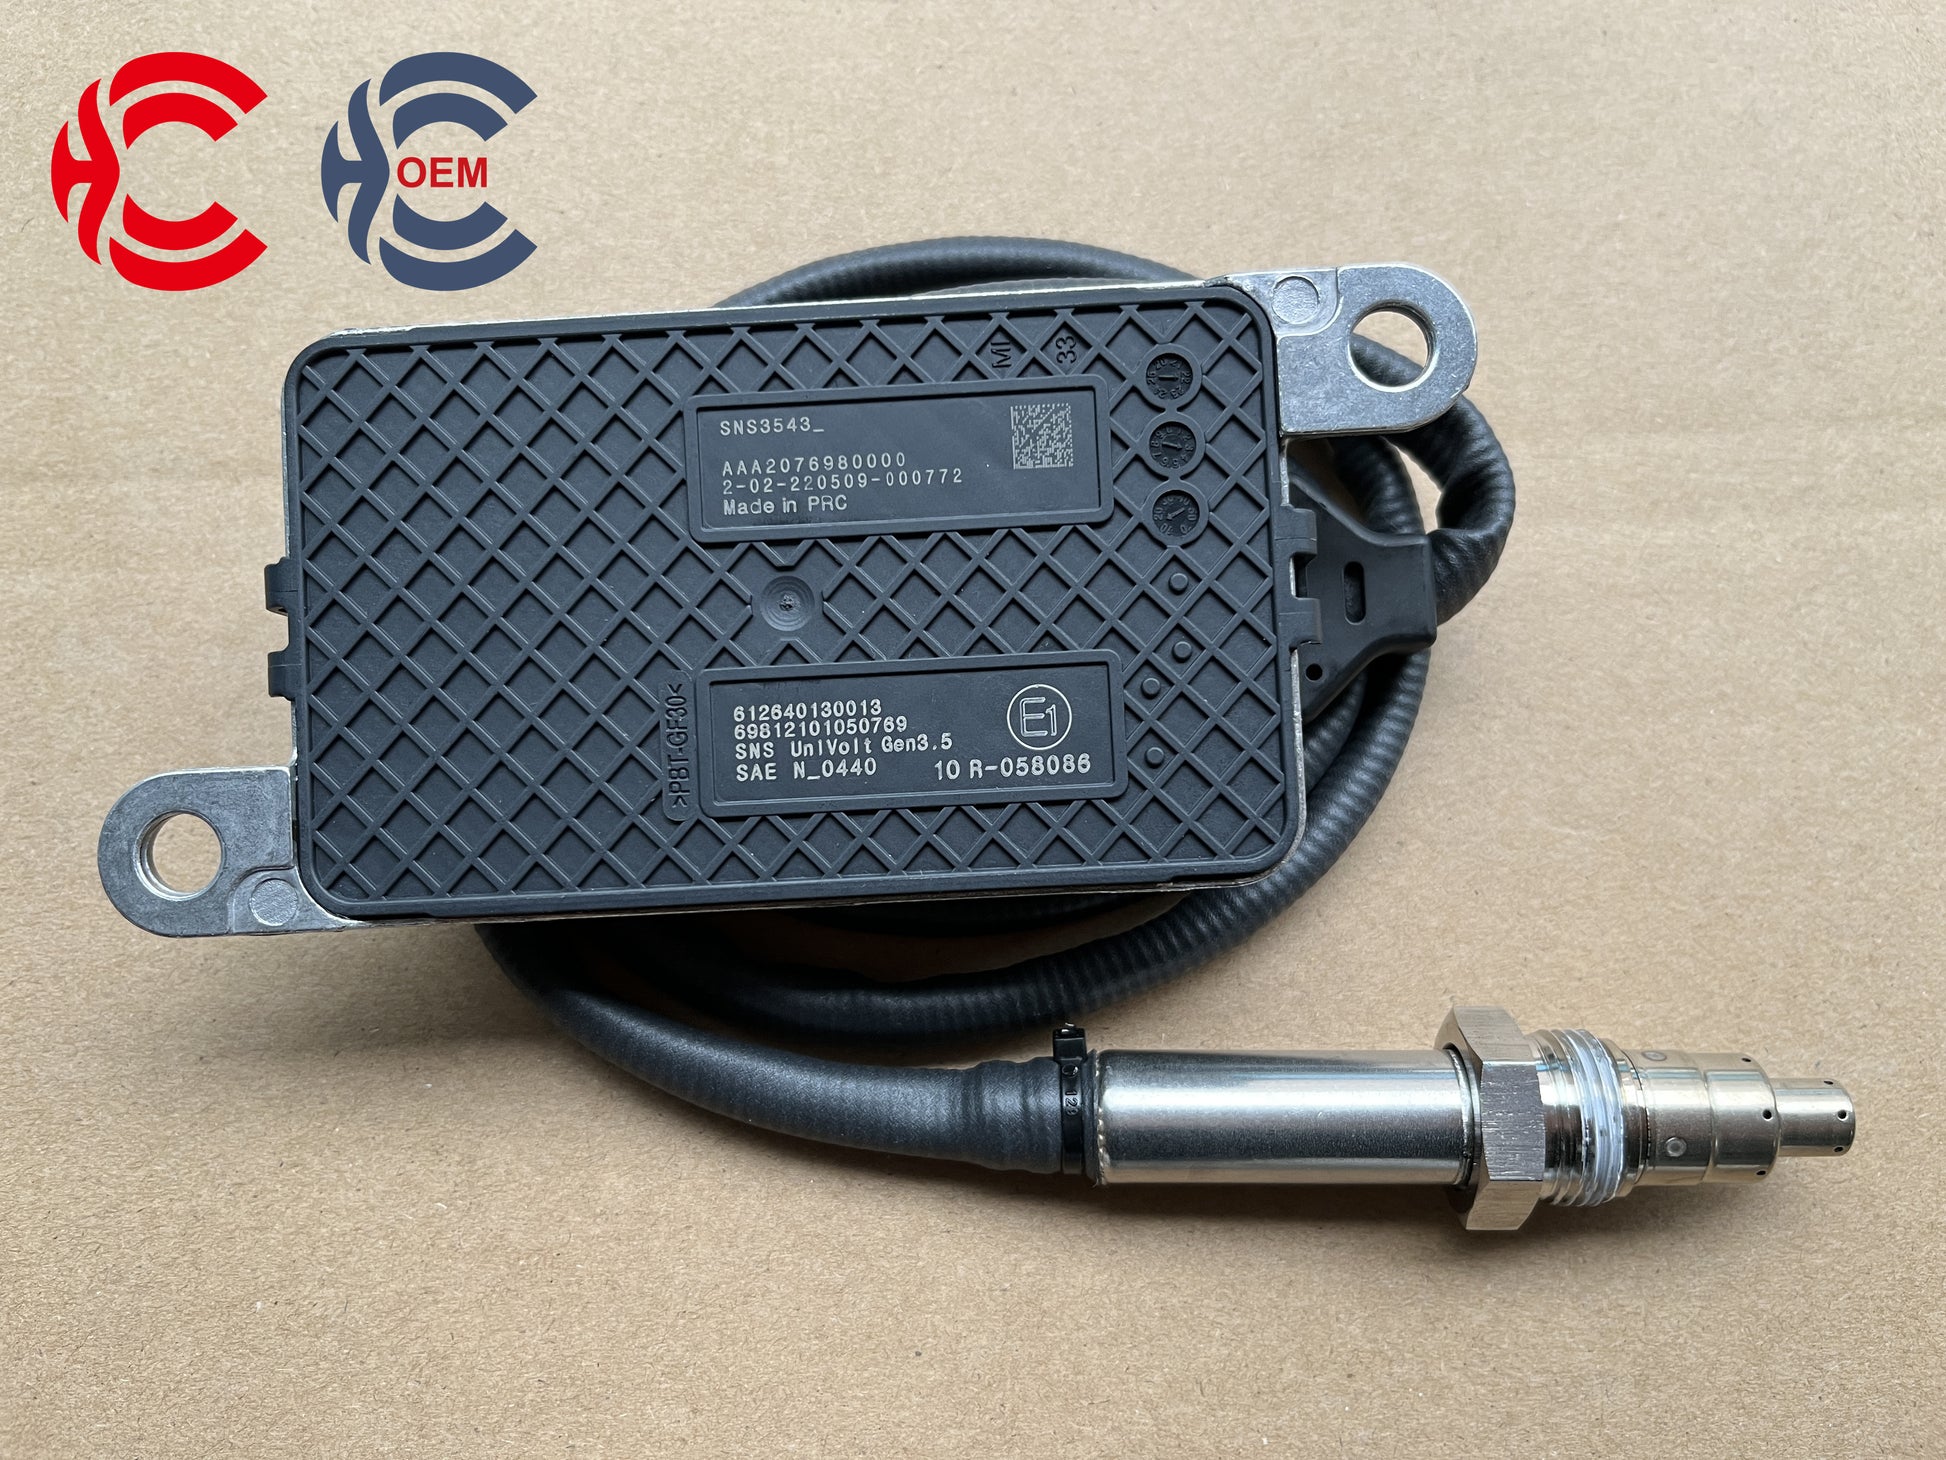 OEM: SNS 3543 612640130013 Gen3.5Material: ABS metalColor: black silverOrigin: Made in ChinaWeight: 400gPacking List: 1* Nitrogen oxide sensor NOx More ServiceWe can provide OEM Manufacturing serviceWe can Be your one-step solution for Auto PartsWe can provide technical scheme for you Feel Free to Contact Us, We will get back to you as soon as possible.